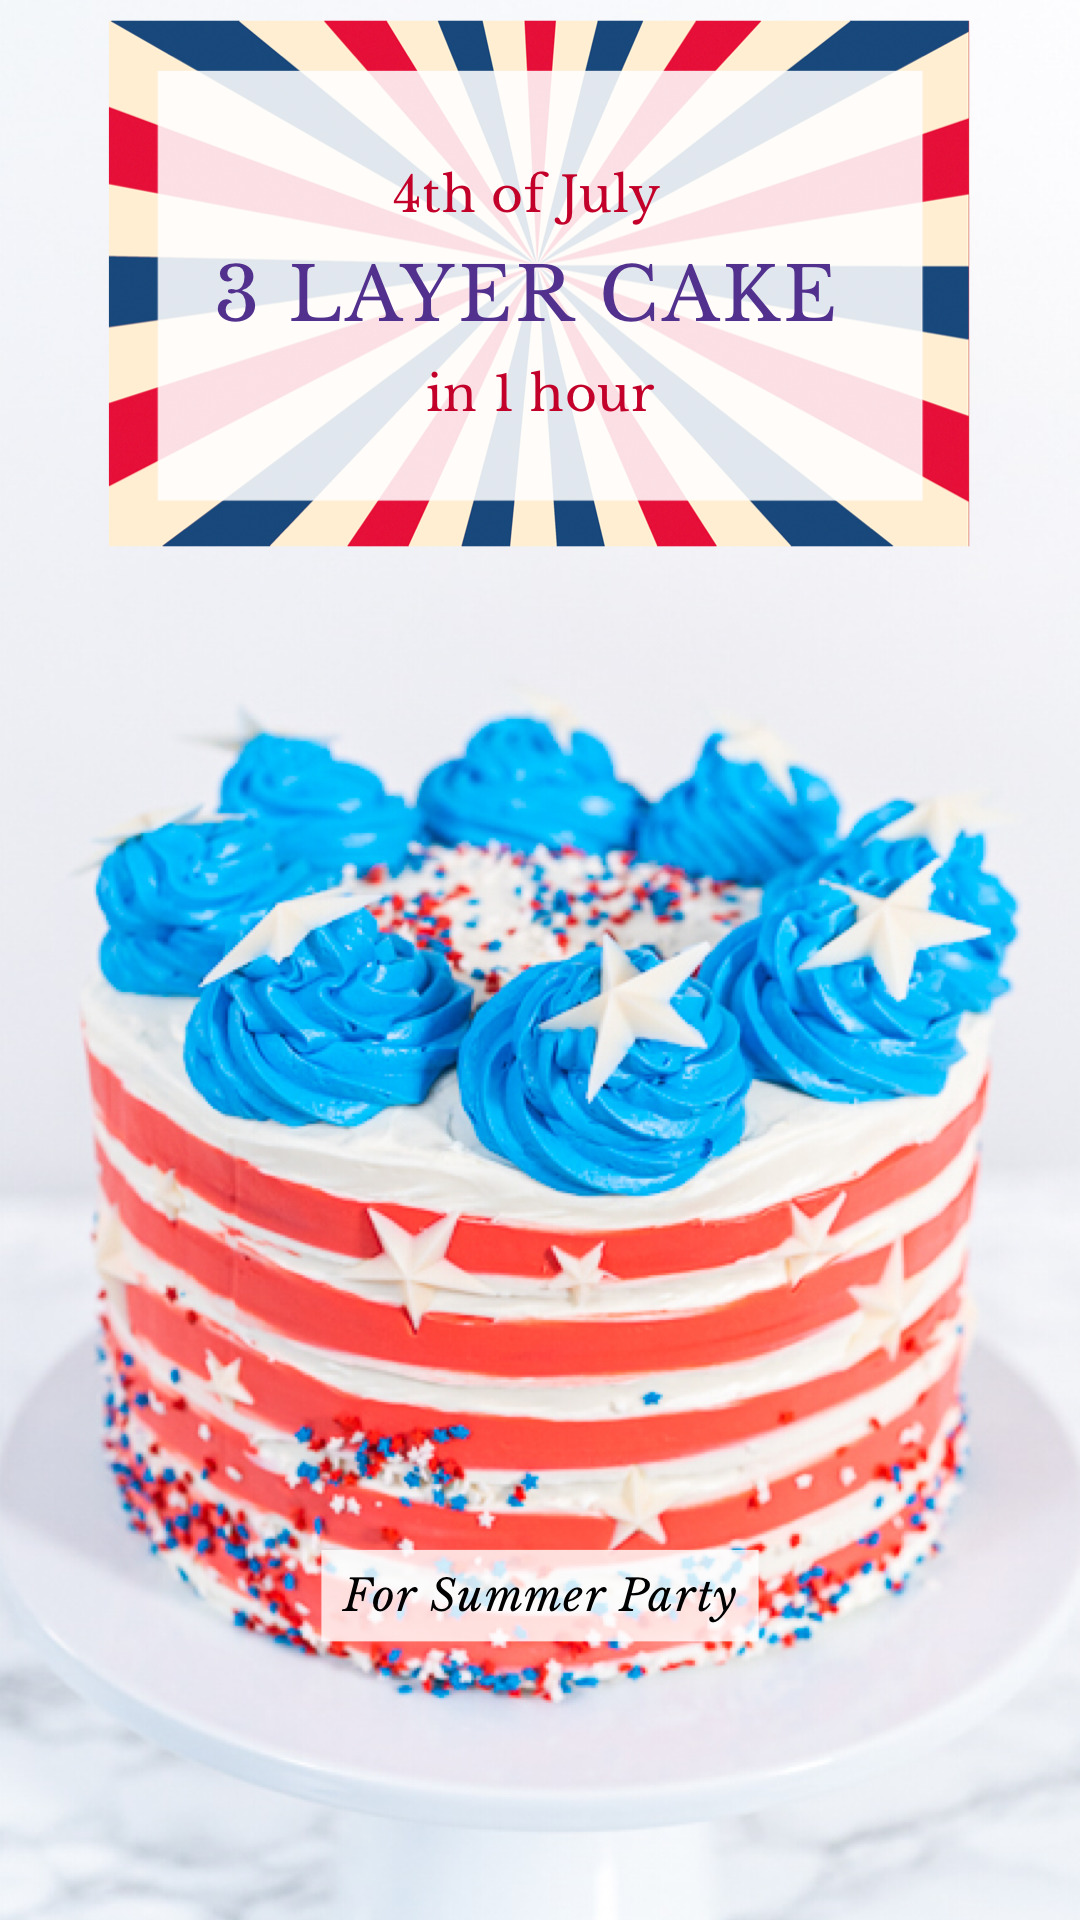 4th of July 3 layer cake in 1 hour